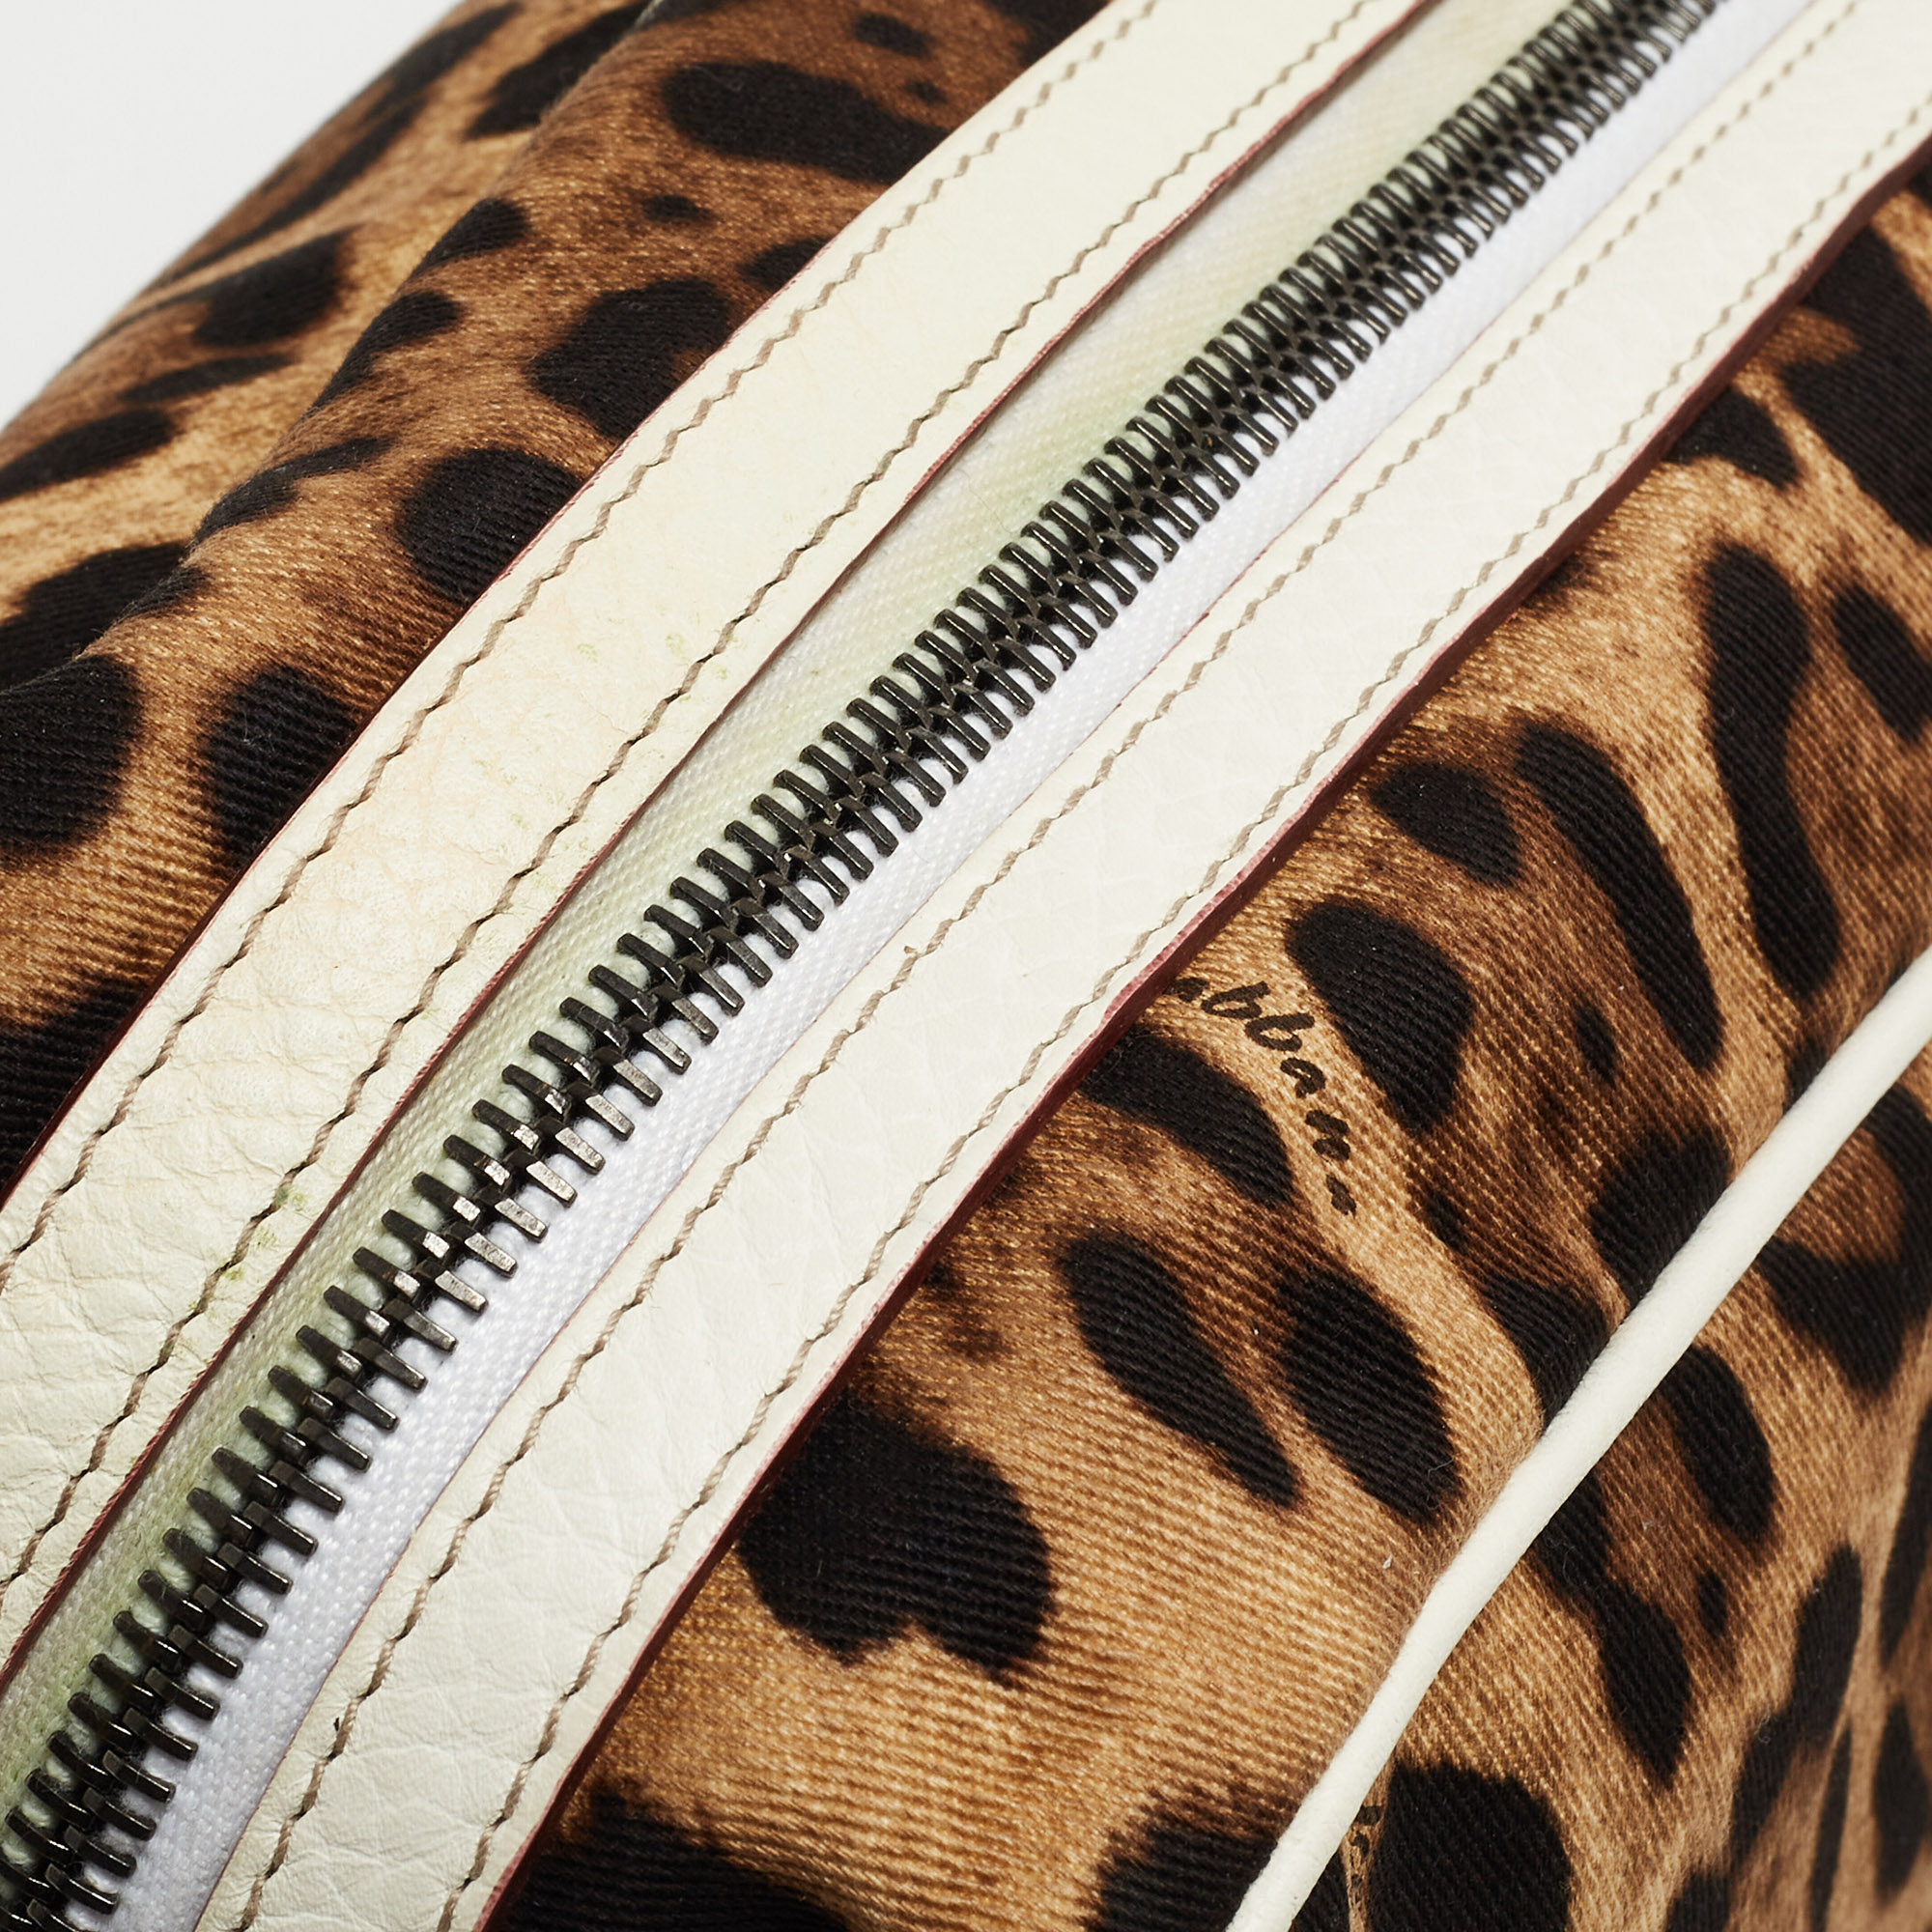 Dolce & Gabbana White/Brown Leopard Print Fabric And Leather Cosmetic Pouch